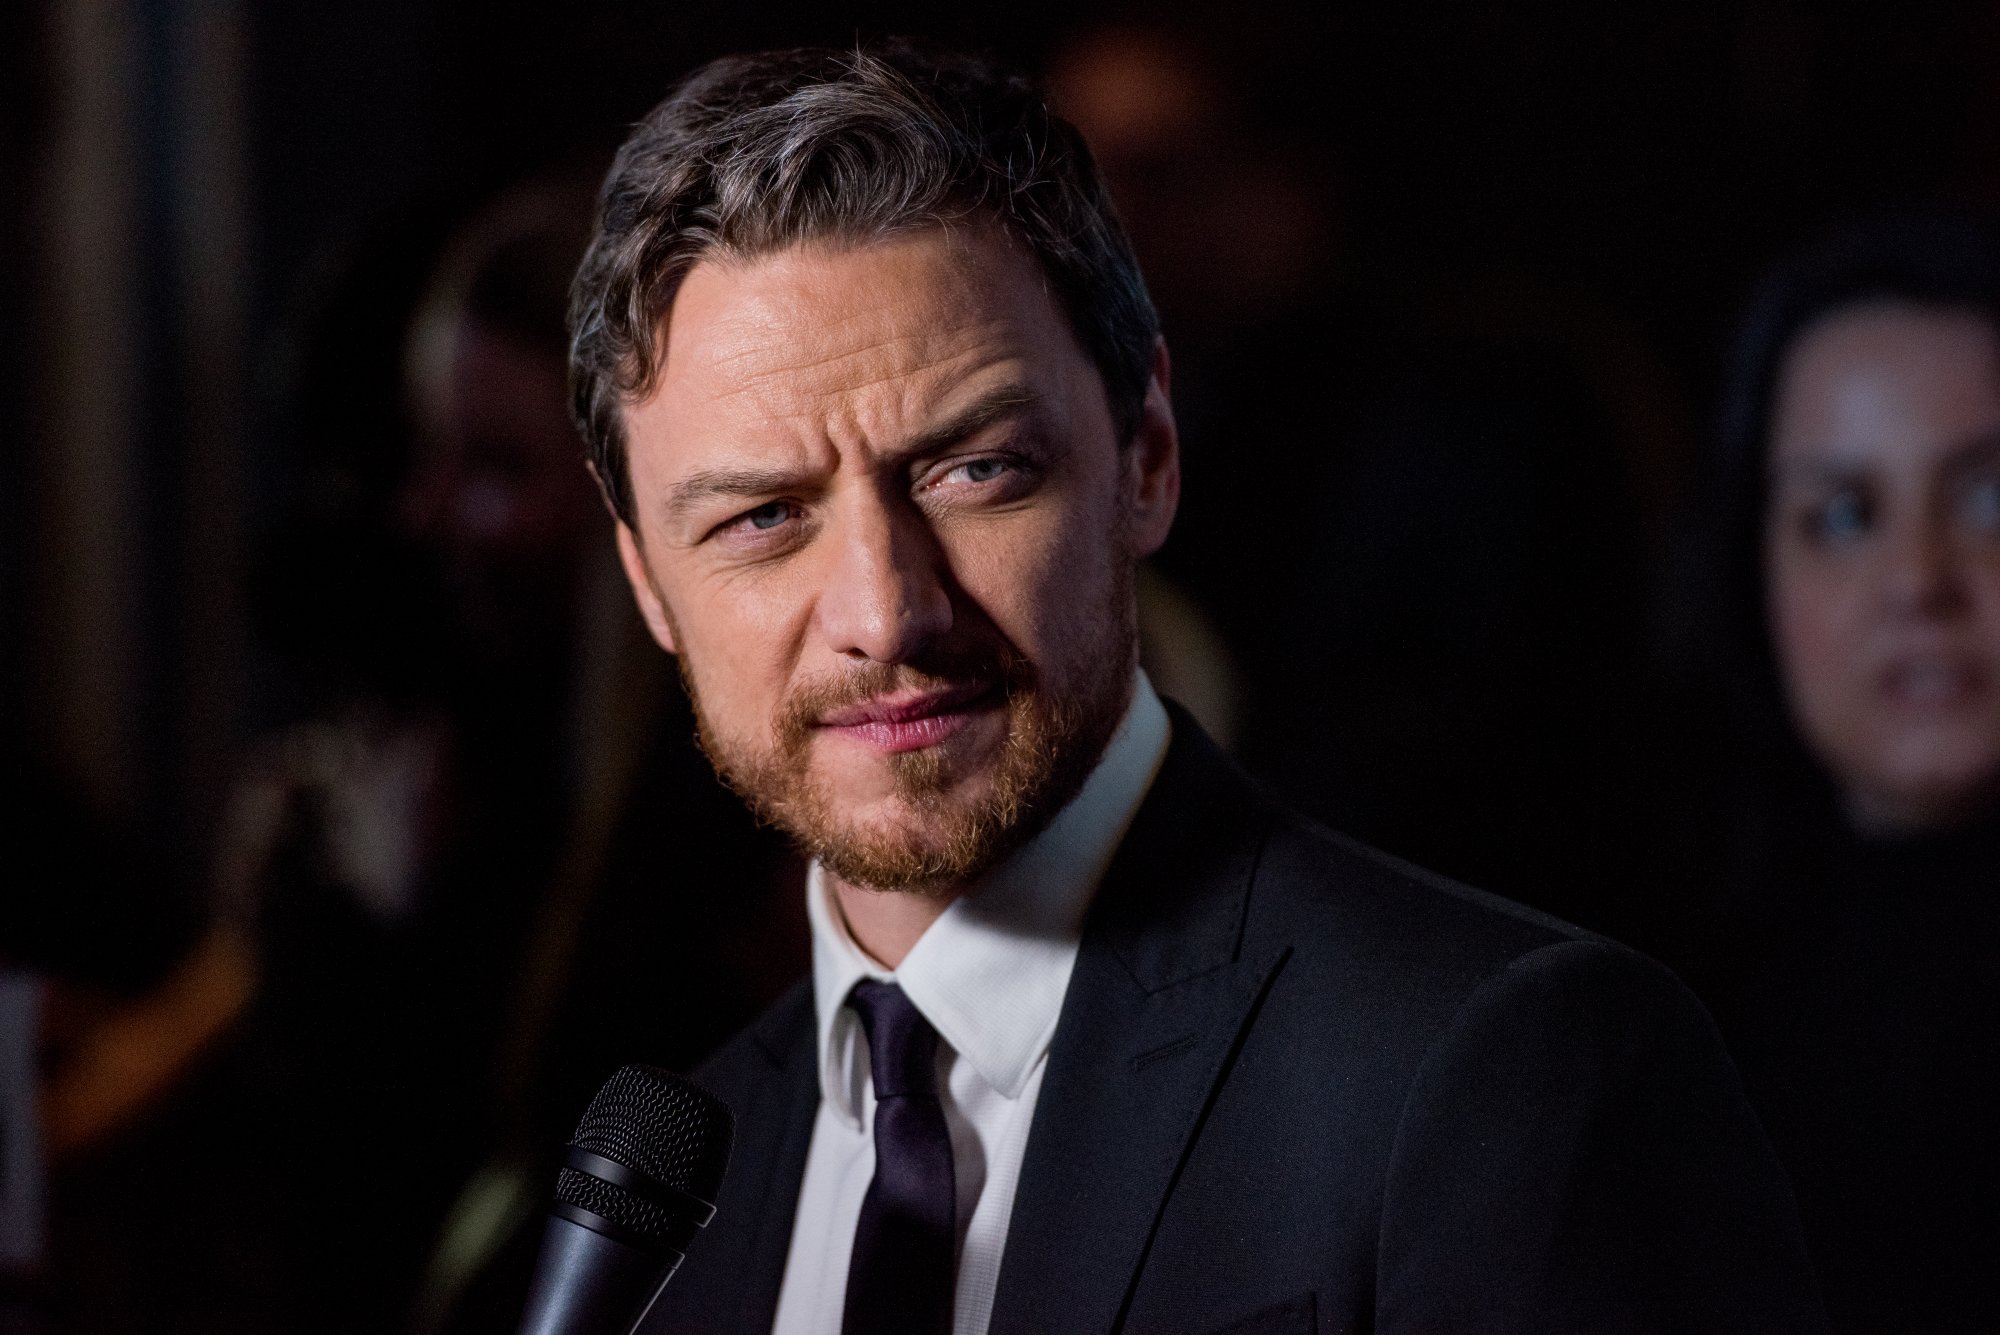 Actor James McAvoy stands in a black suit and tie with a microphone. Before becoming an actor, McAvoy almost led a completely different life as a missionary.